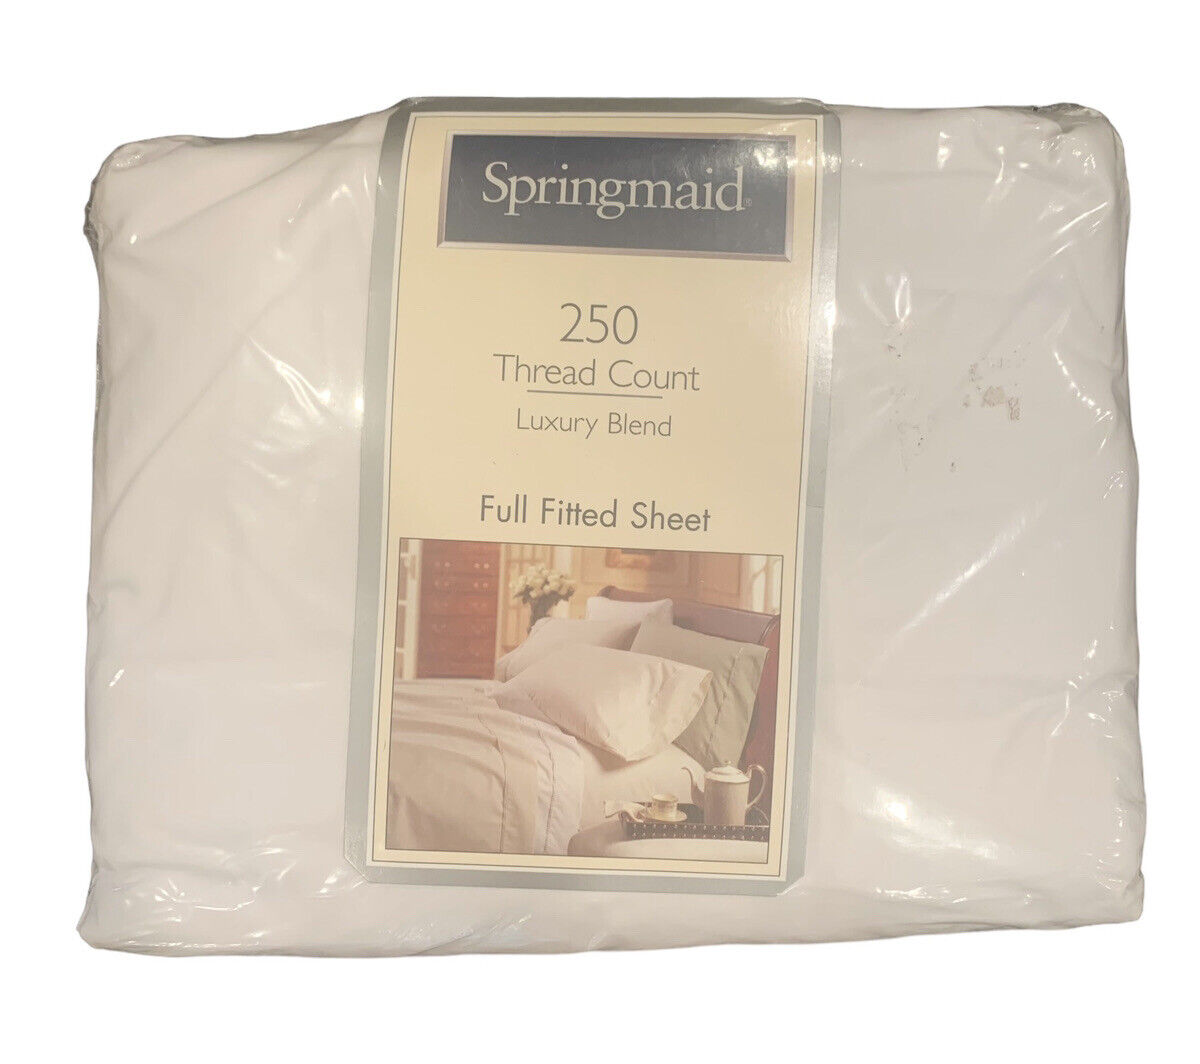 Springmaid Vintage New White Full Fitted Sheet 250 Thread Count